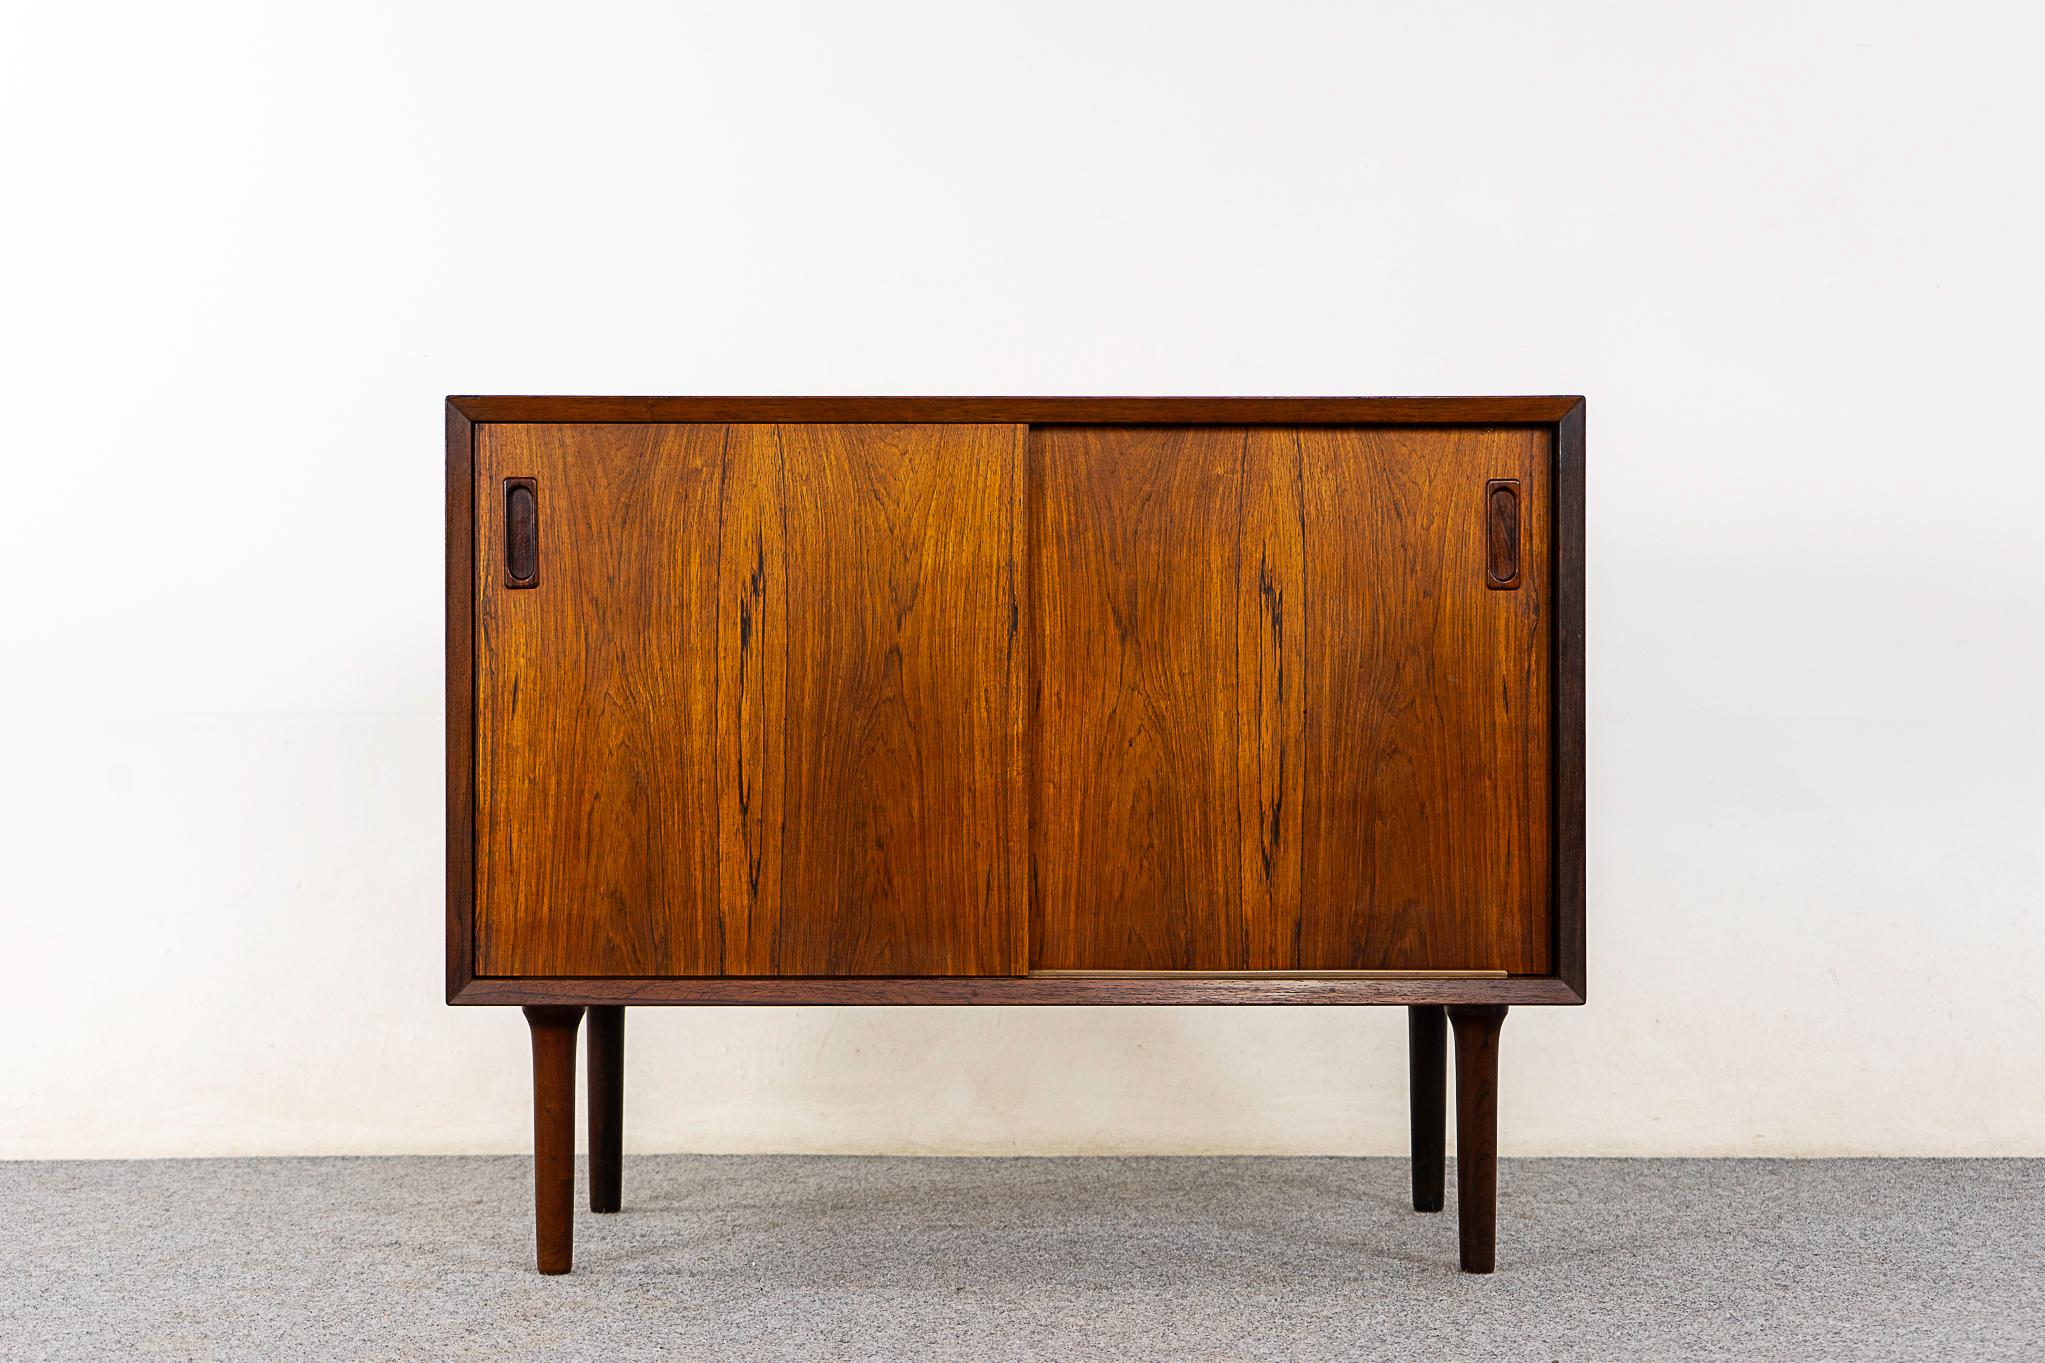 Rosewood cabinet by LYBY Mobelfabrik, circa 1960's. Beautiful book-matched veneer with lovely grain patterns and sleek finger pulls. Robust sculpted legs and beveled edge solid wood trim. Adjustable interior shelf with 5 height options. A perfect